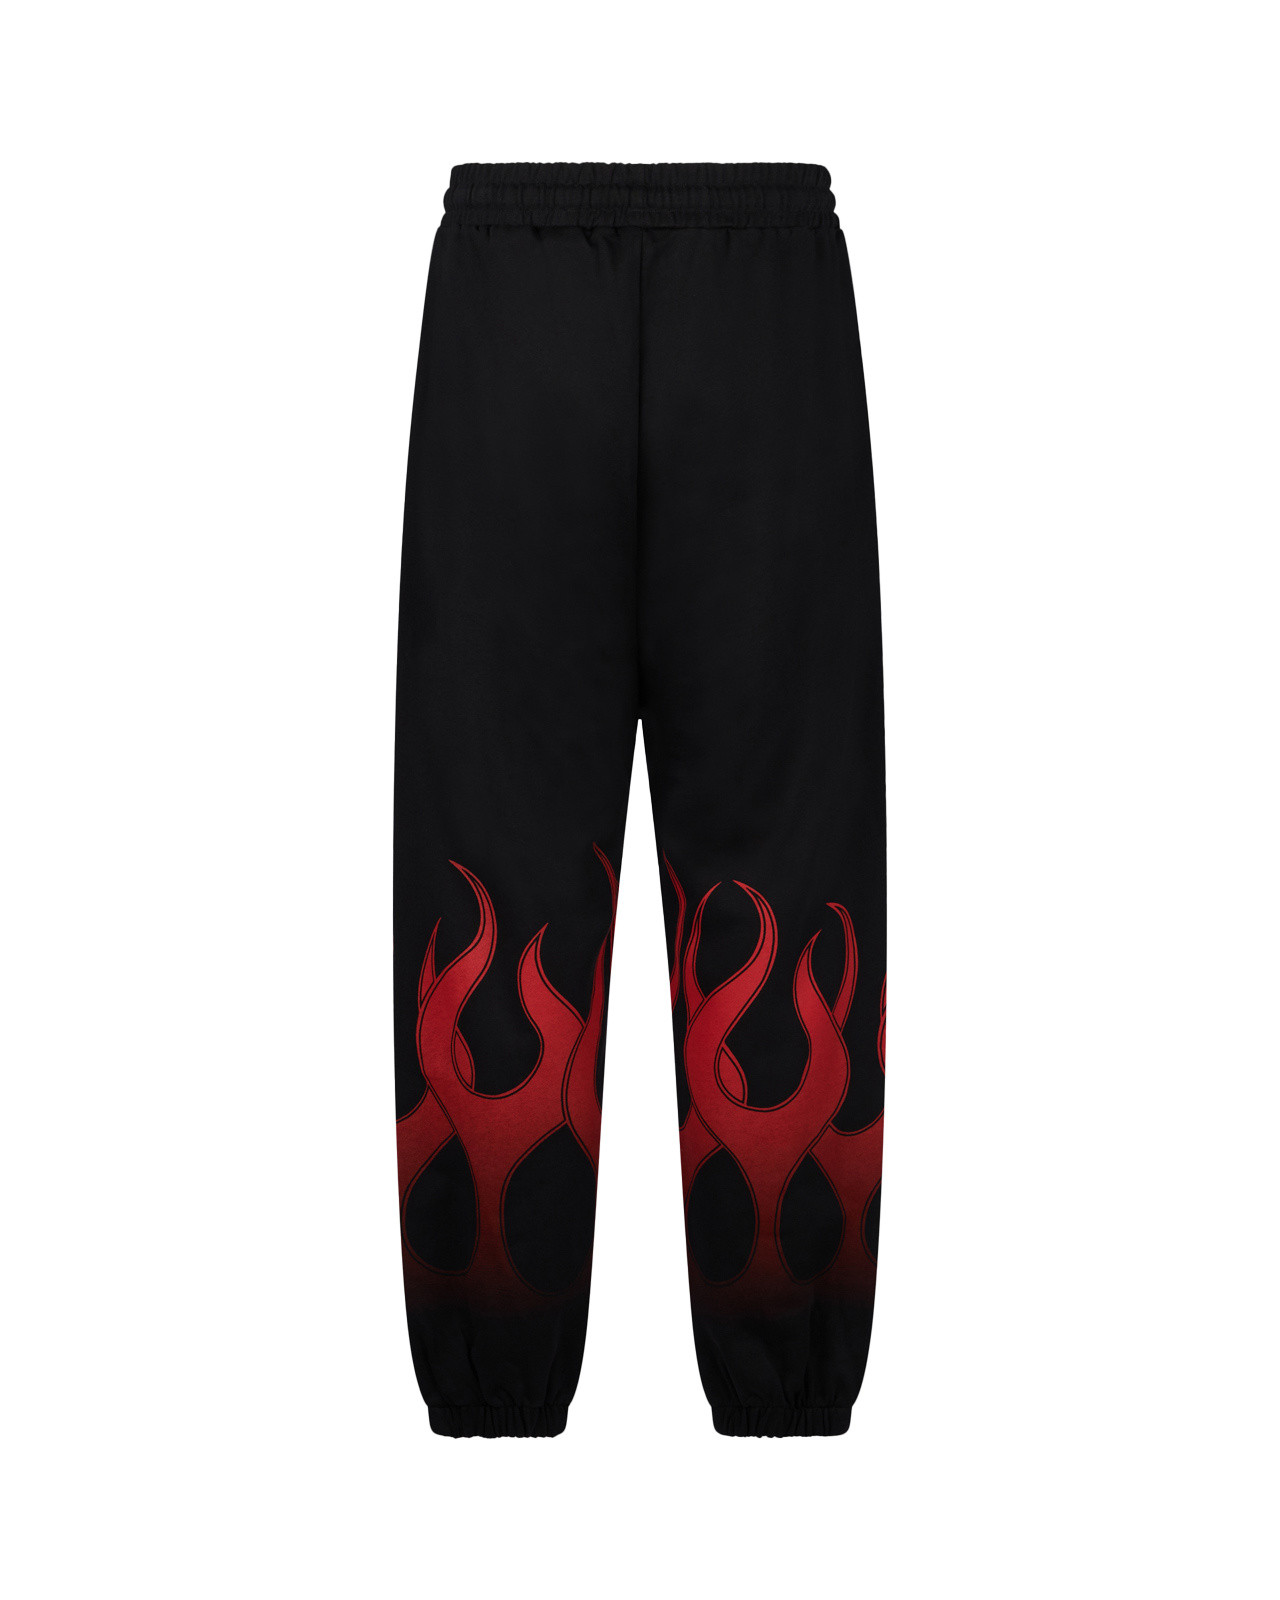 Vision of Super - Pants with racing flames, Black, large image number 1